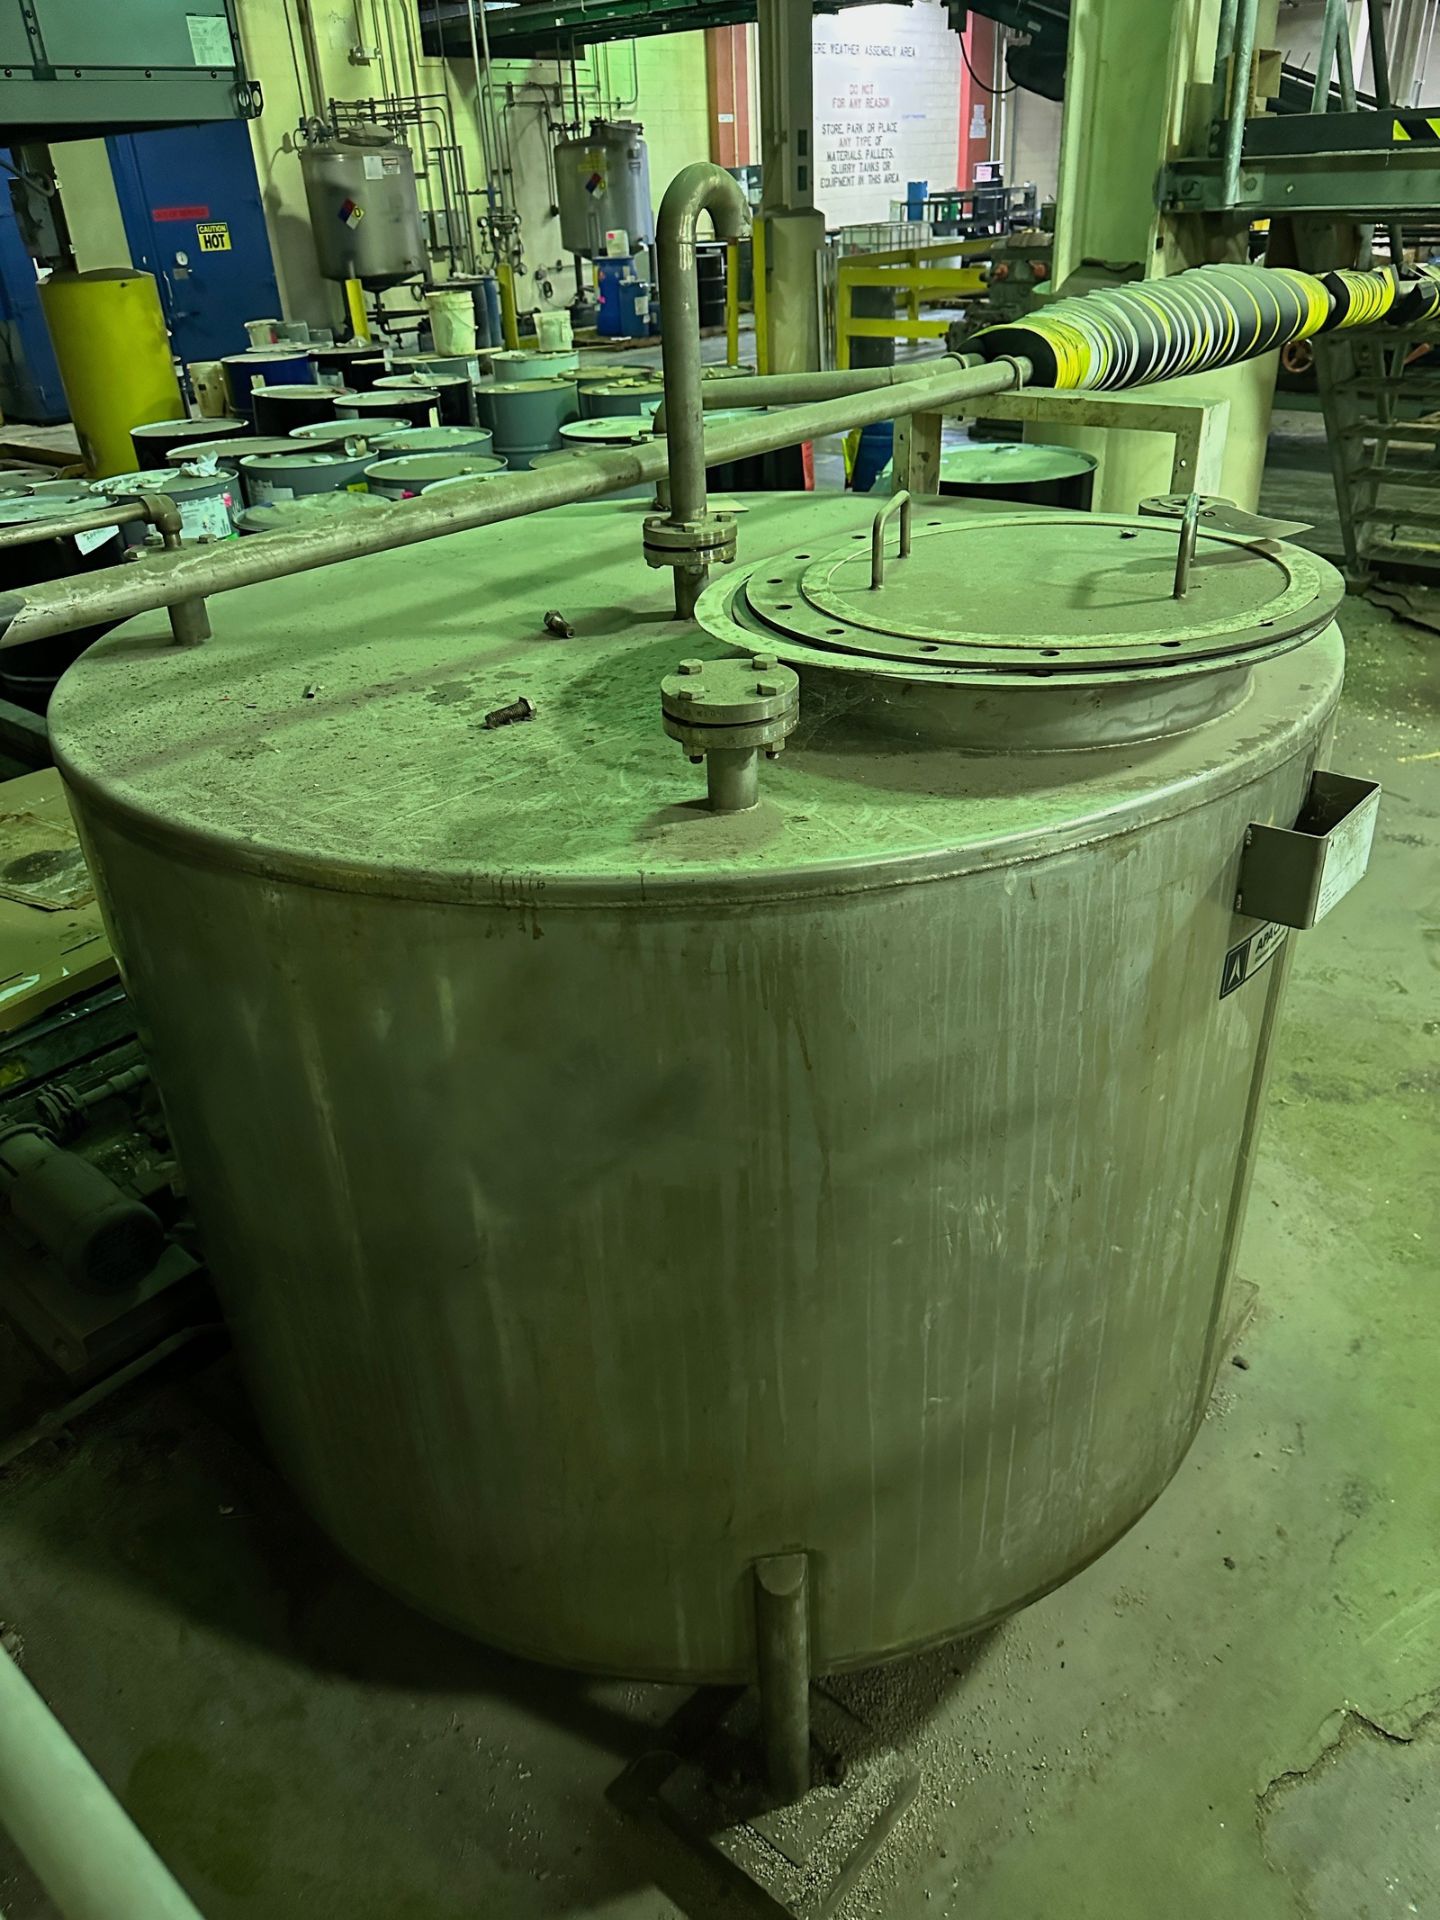 Apache 675 Gallon Stainless Steel Perfume Tank (Approx. 5'6" Diameter and 5'6" O.H. | Rig Fee $200 - Image 2 of 3